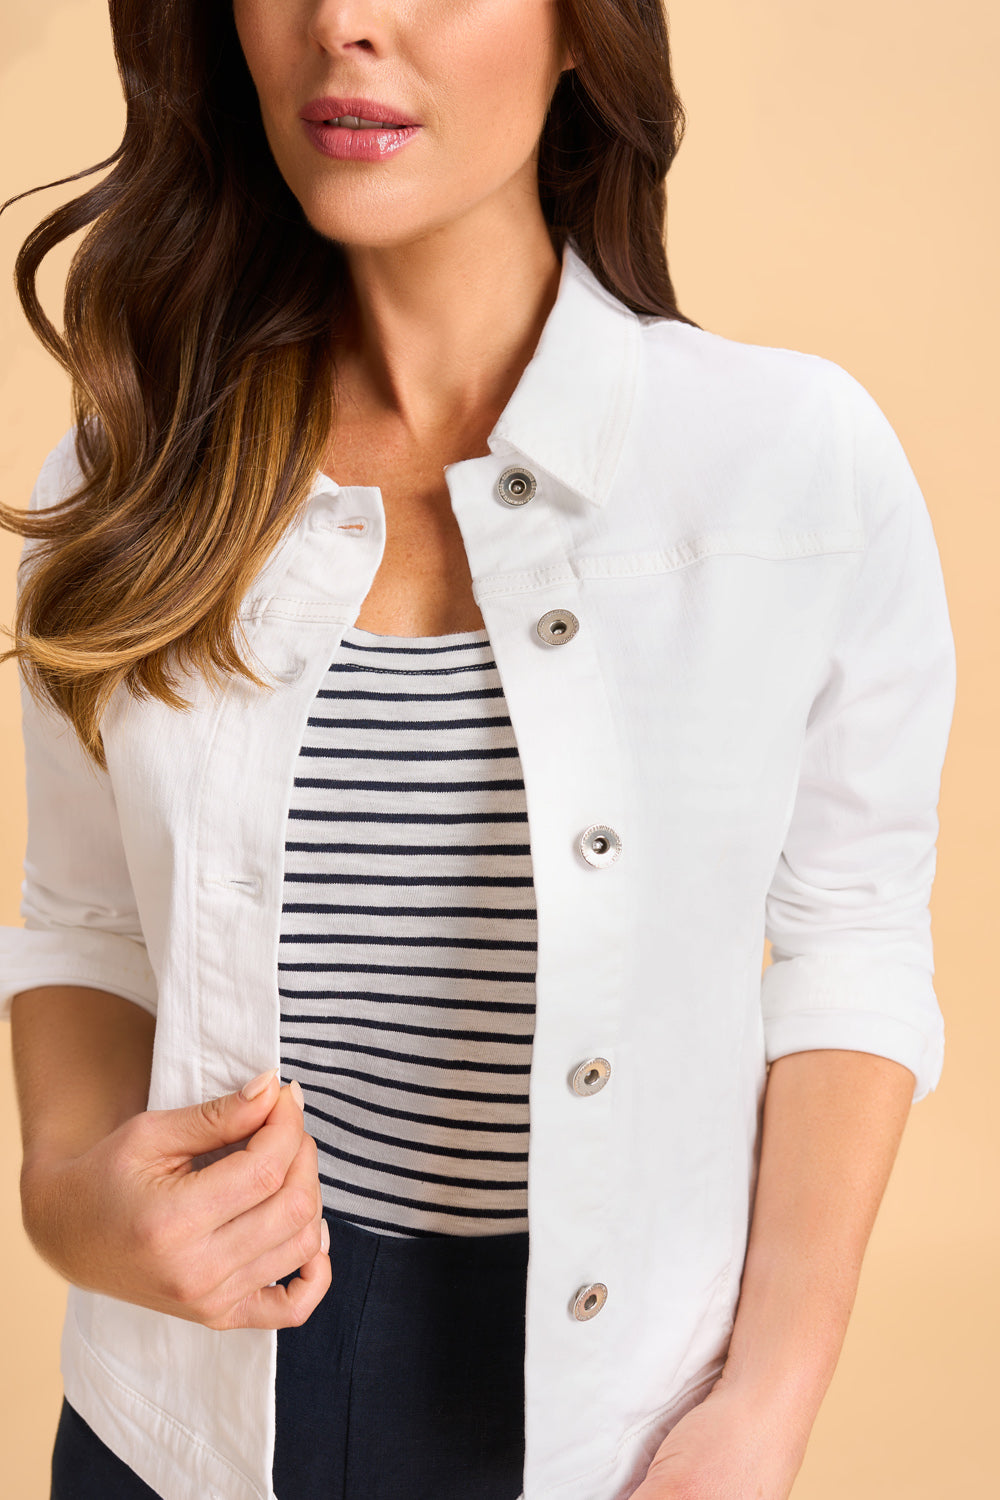 27 Cute Jean Jacket Outfit Ideas: What To Wear With Denim